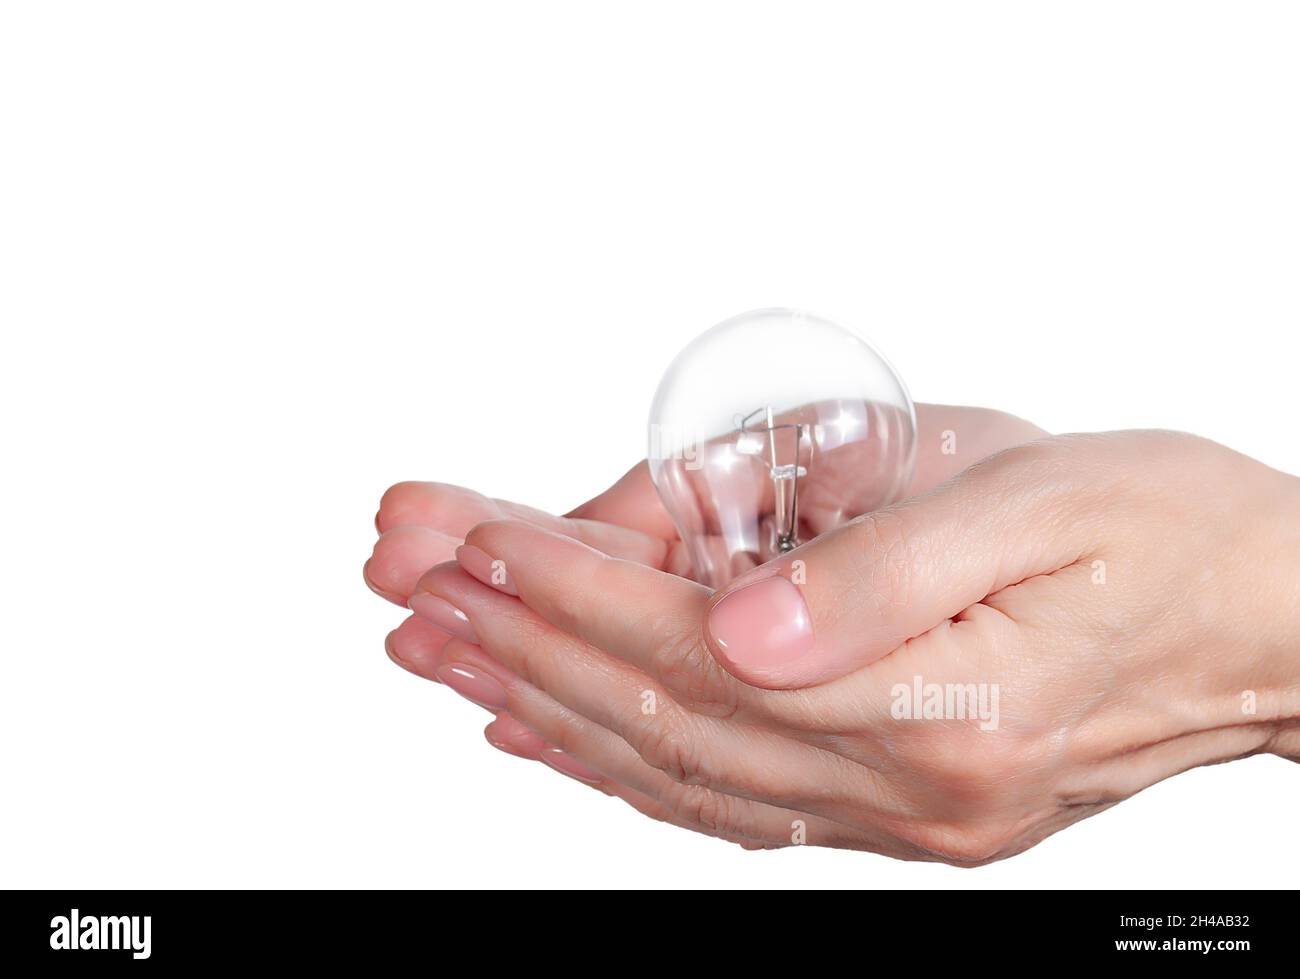 Woman's hand holding a light bulb isolated on white background. Mock up of green energy and innovation concept Stock Photo